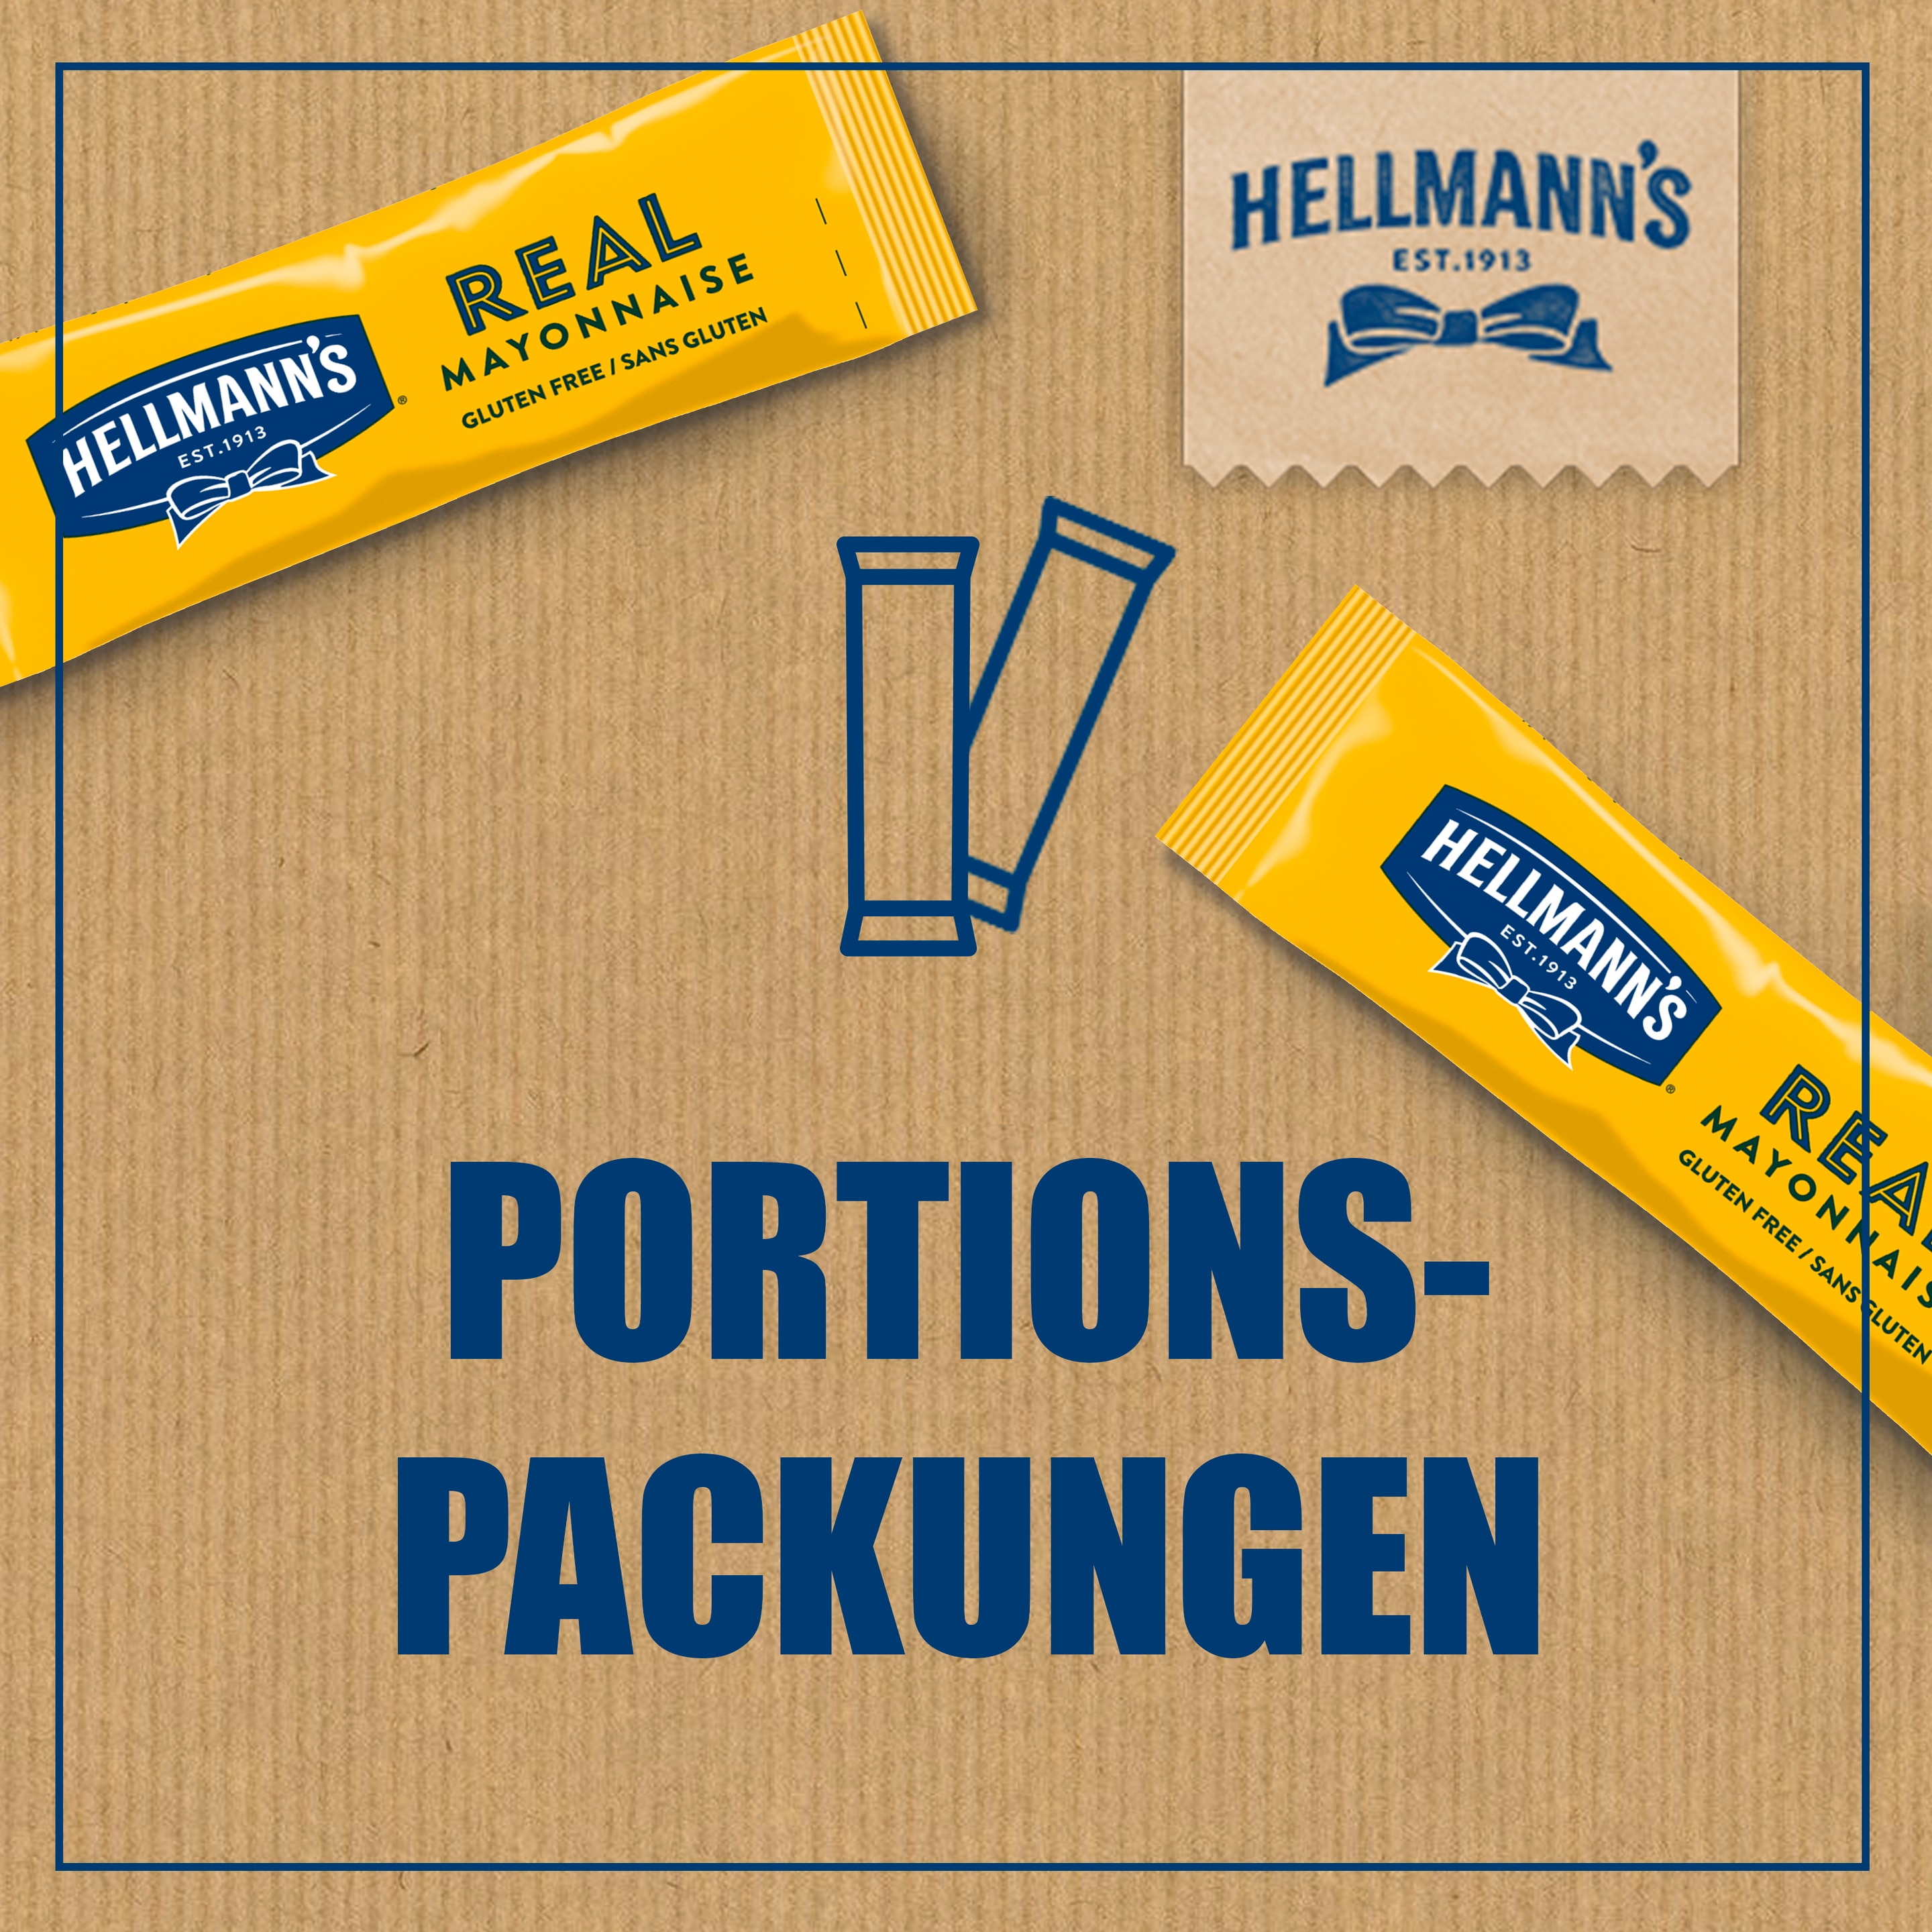 Portions packungen